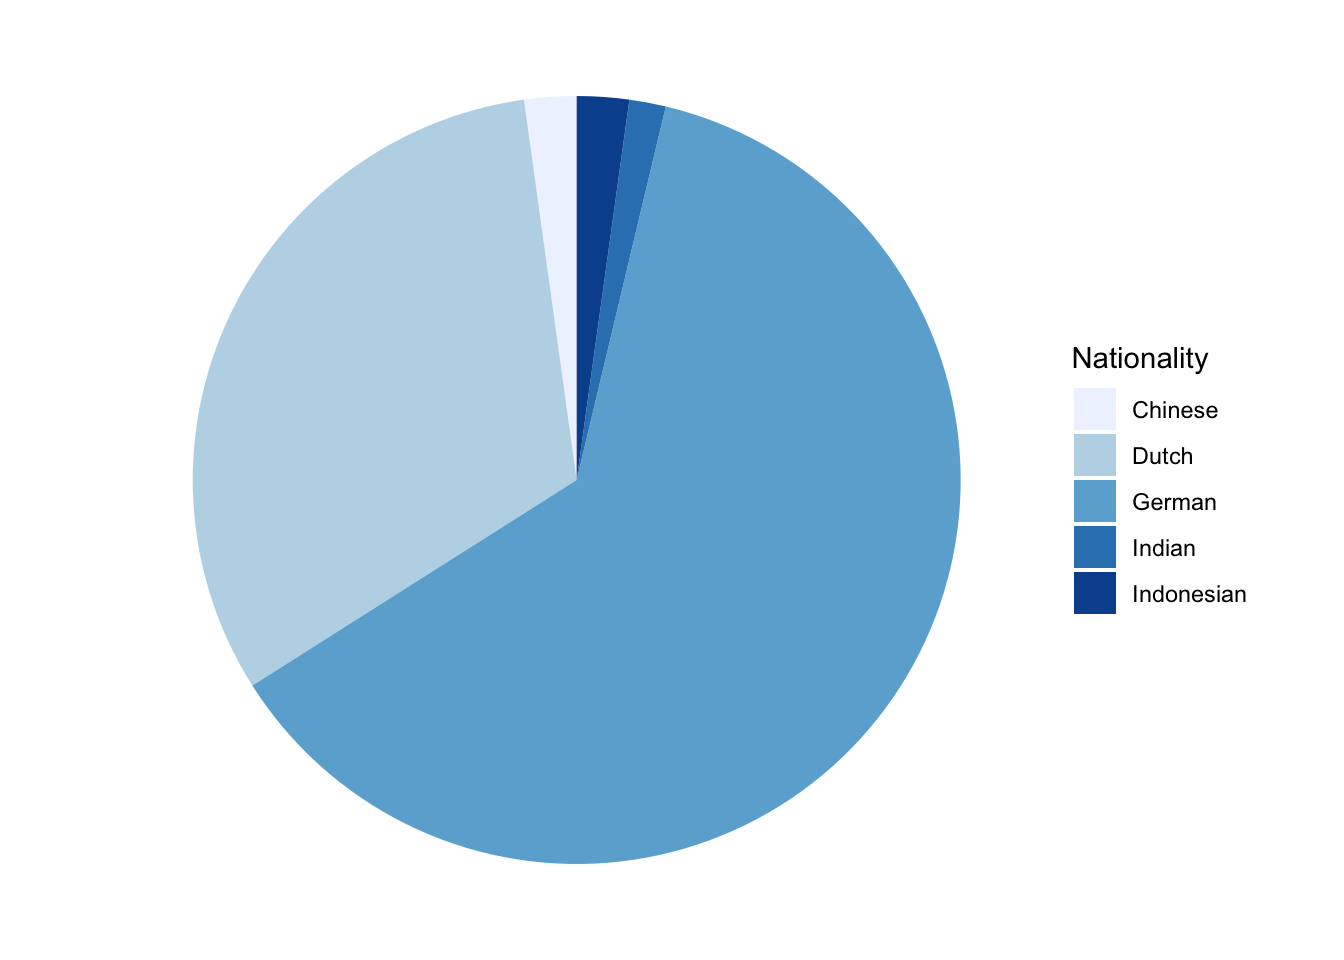 A pie chart of nationalities.